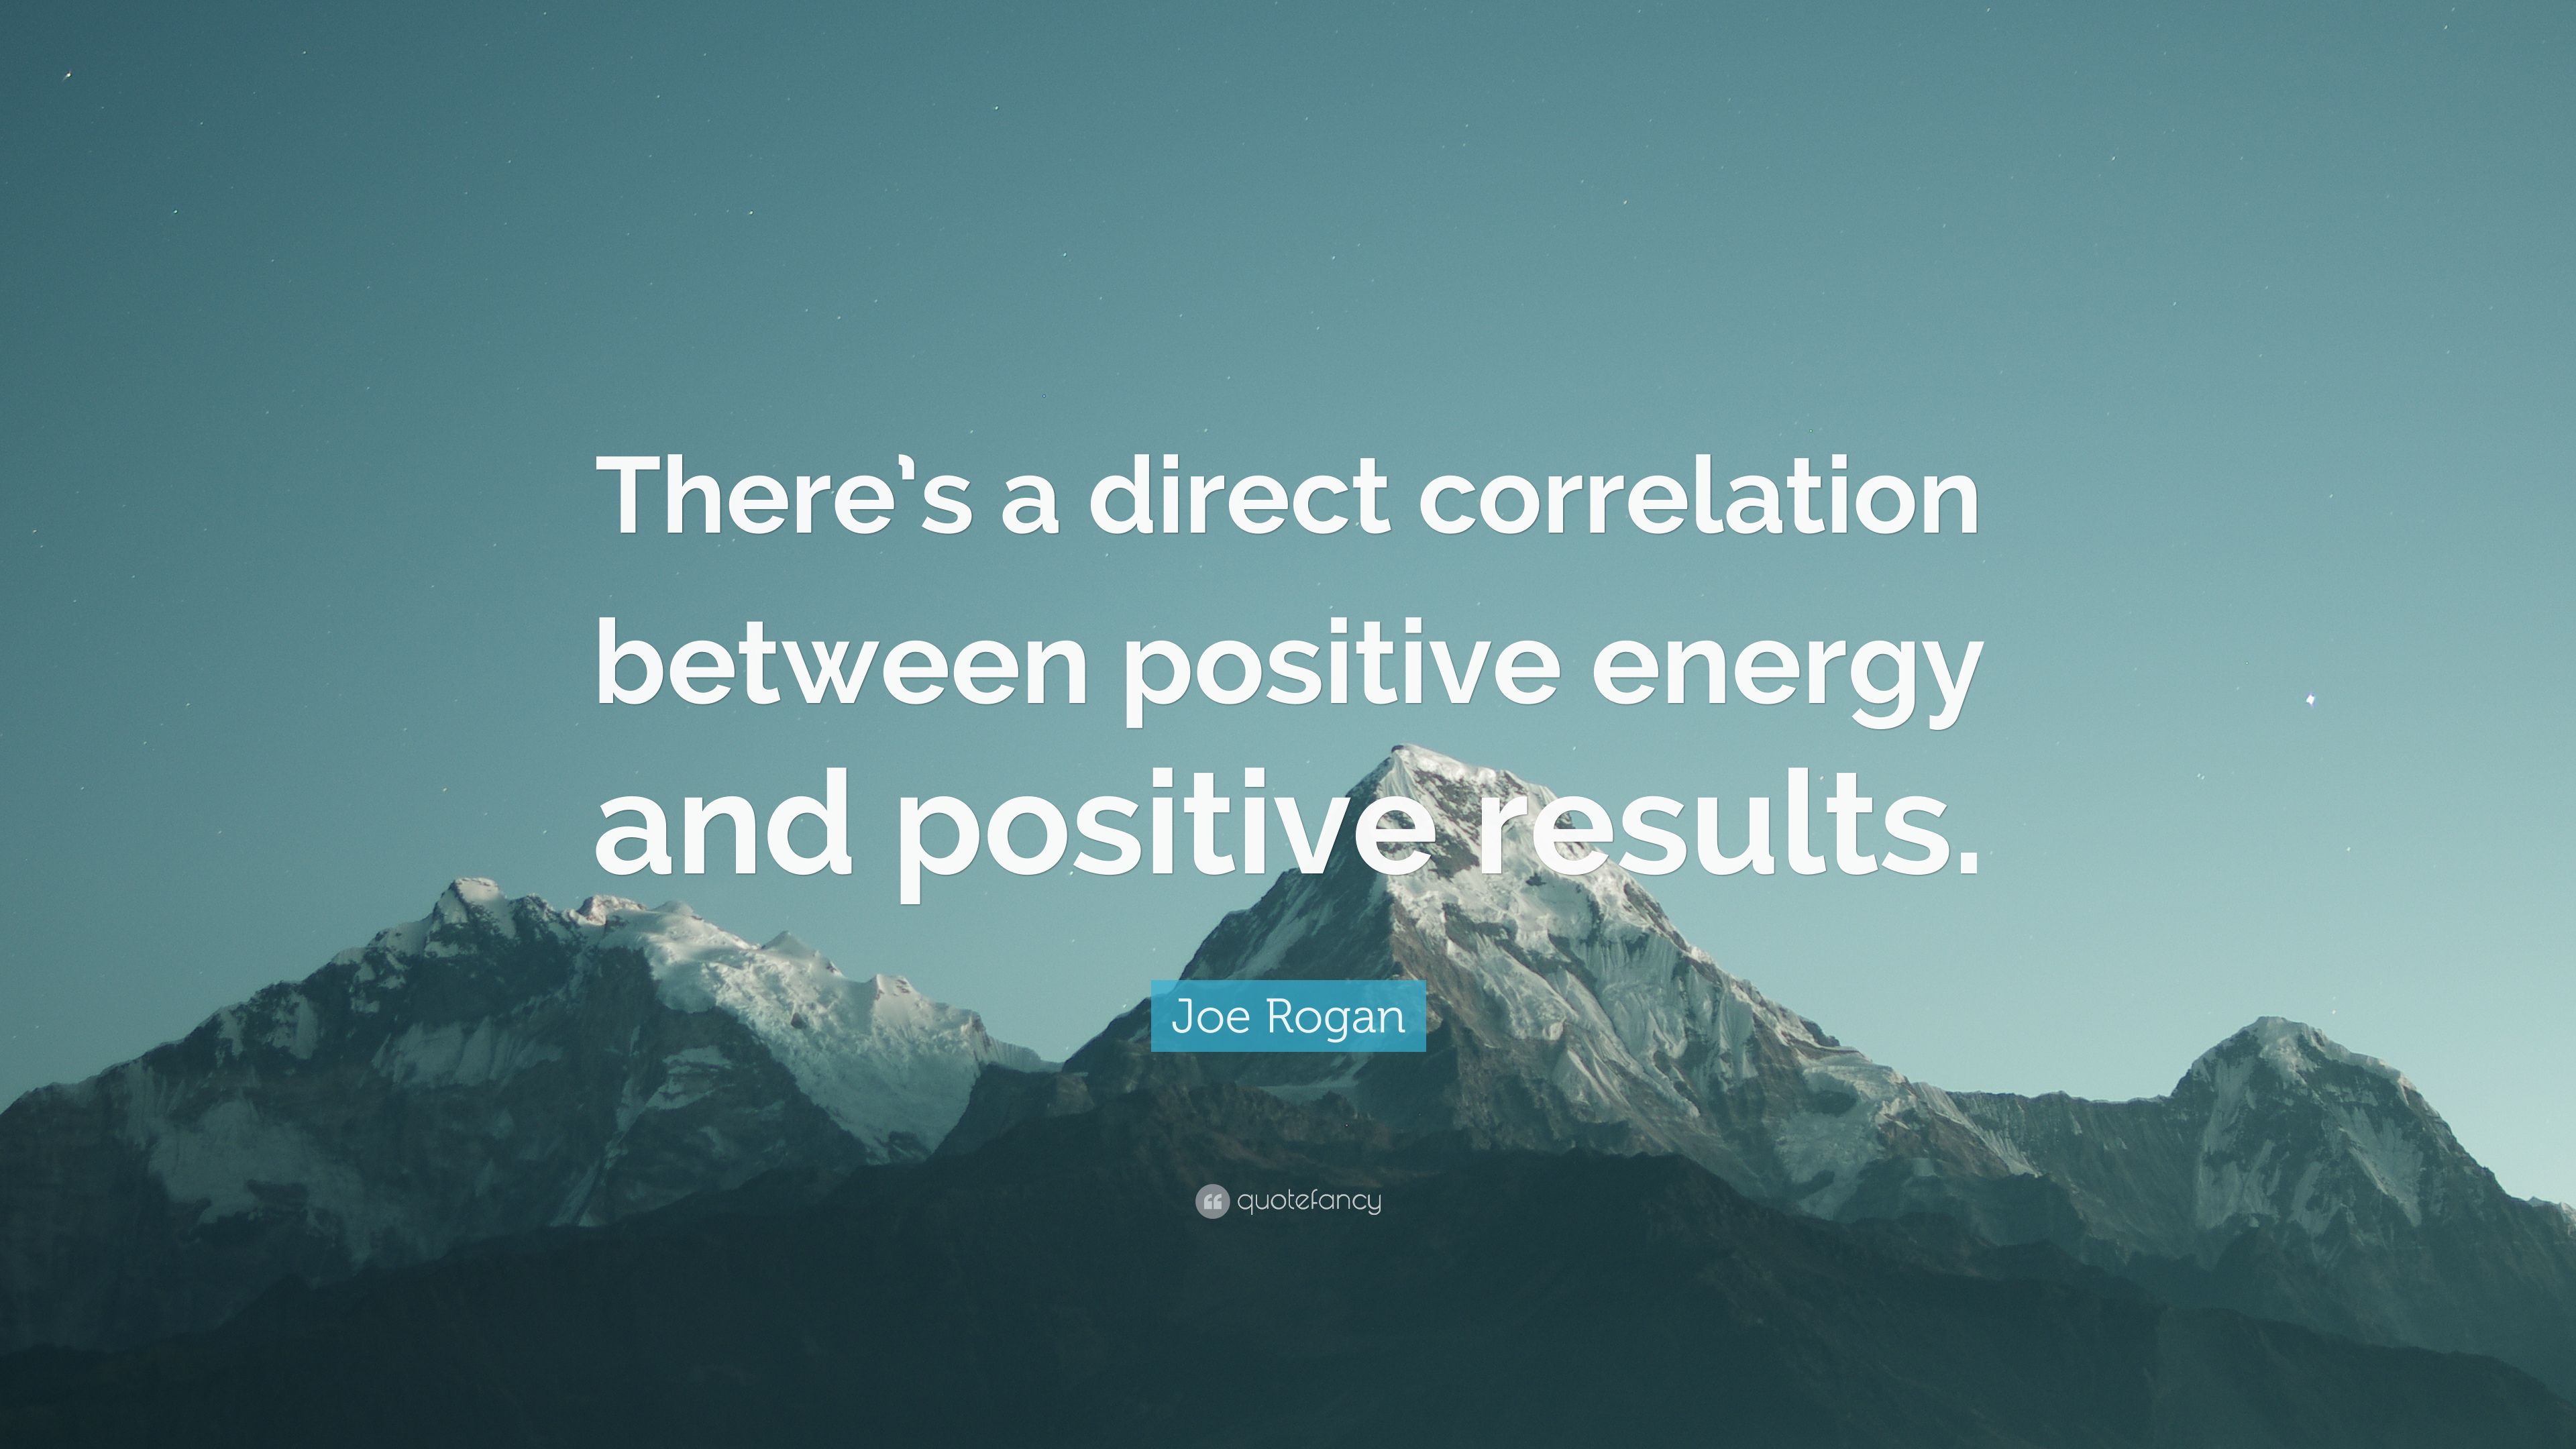 Joe Rogan Quote: “There's a direct correlation between positive